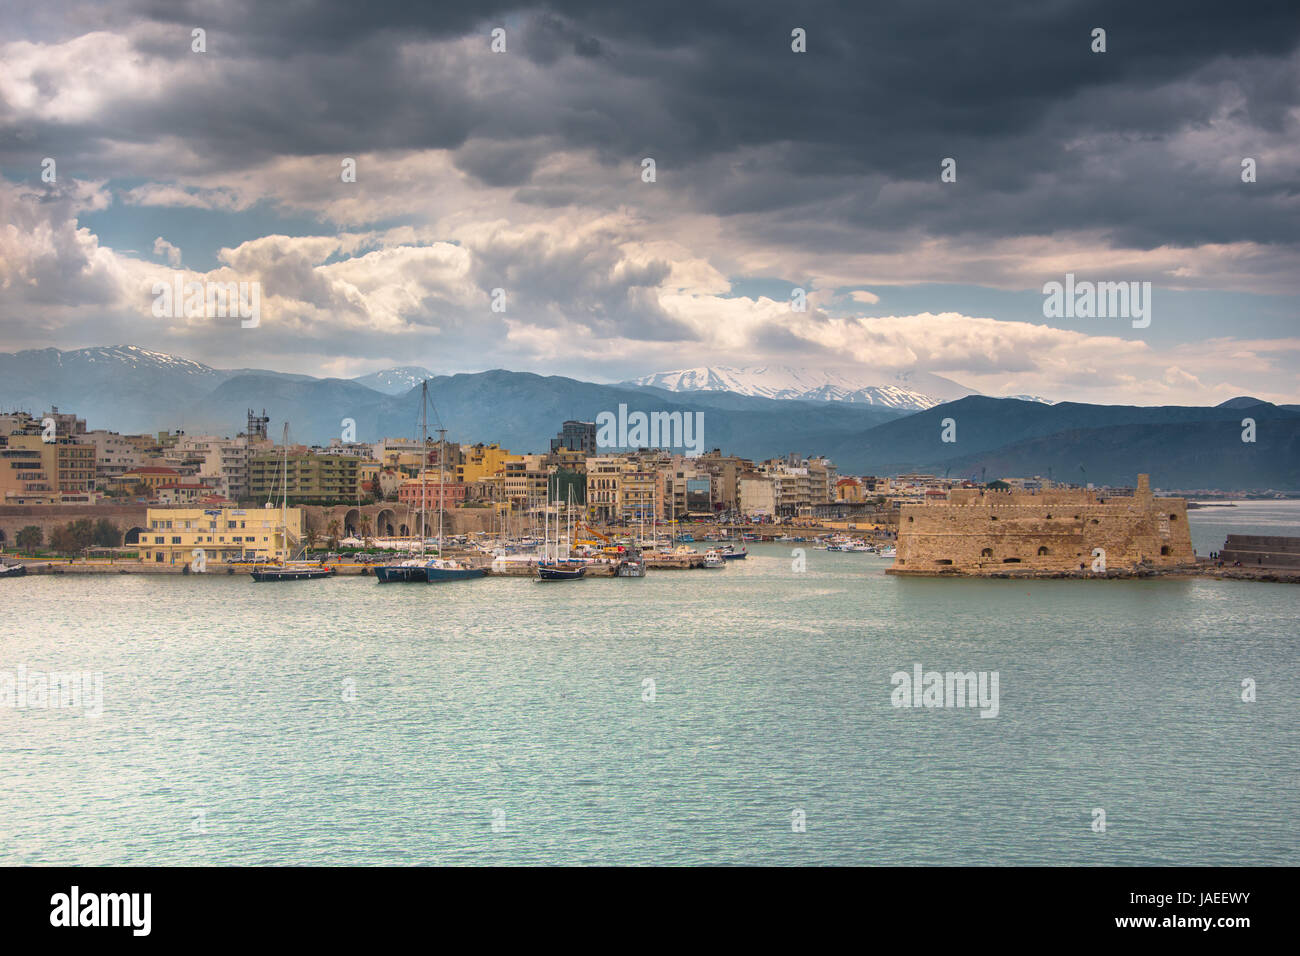 Old harbour of Heraklion with Venetian Koules Fortress, boats and marina at night, Crete, Greece. Stock Photo